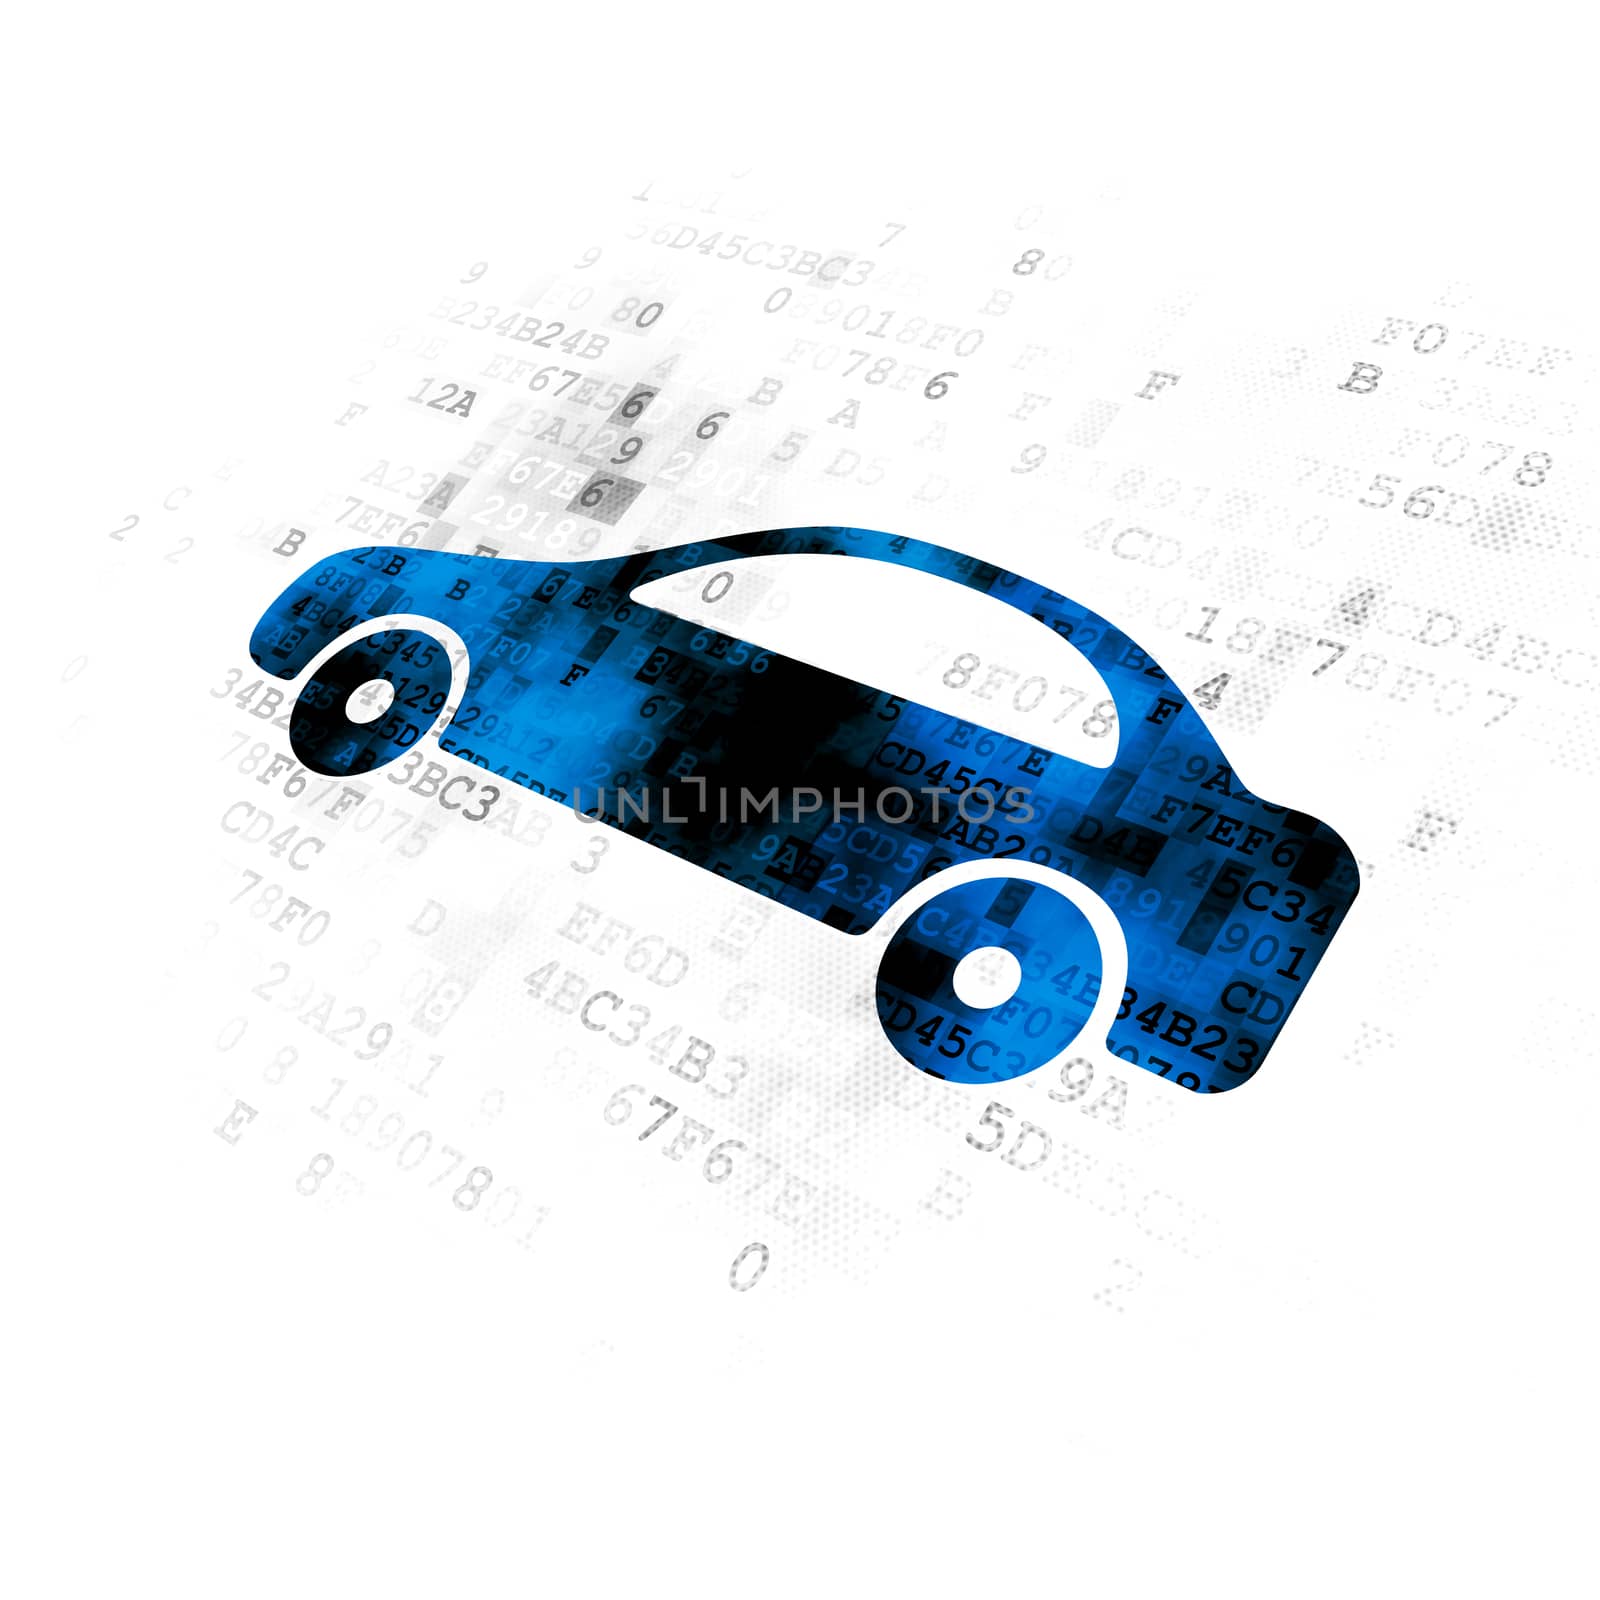 Tourism concept: Pixelated blue Car icon on Digital background